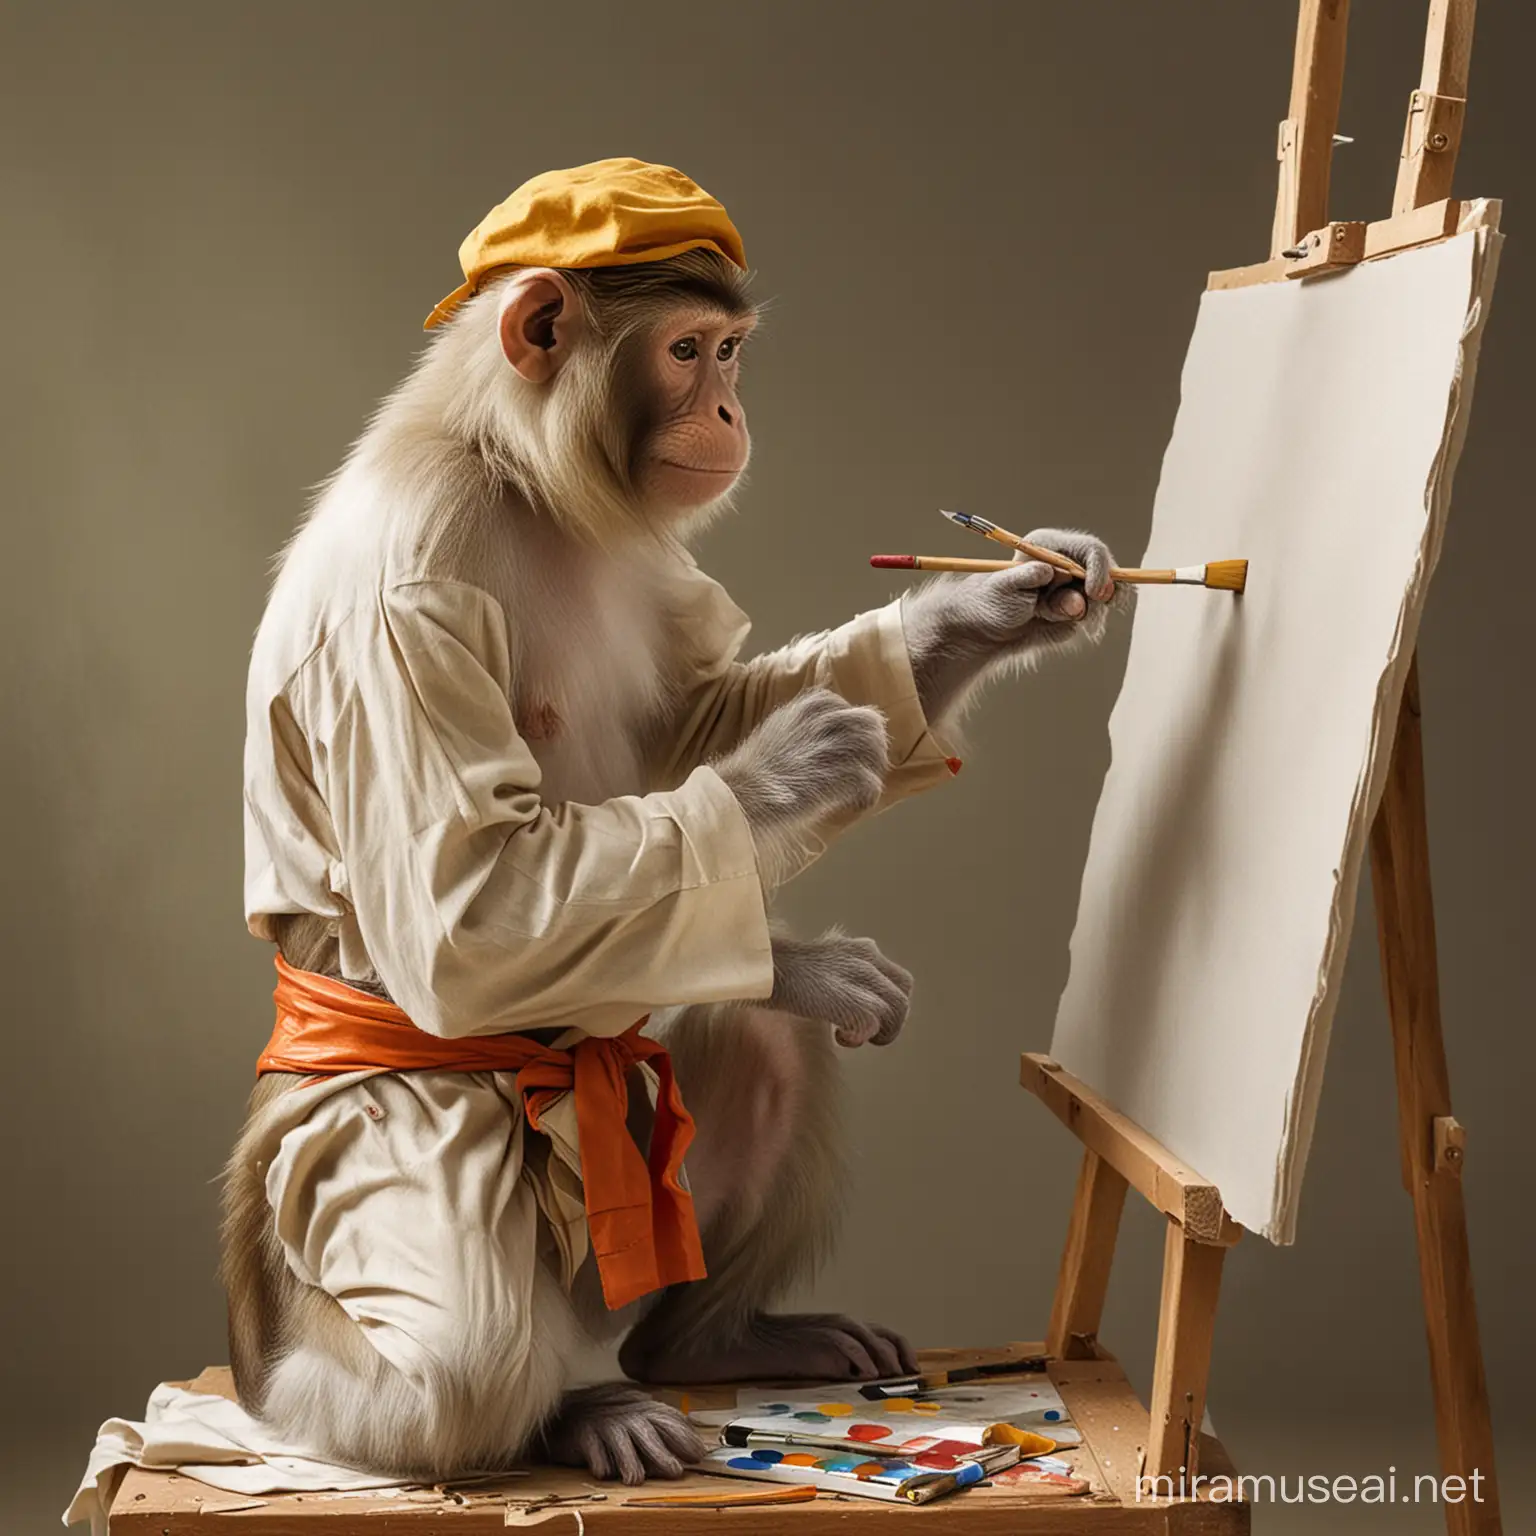 A monkey dressed as a painter, the monkey is painting on a canvas